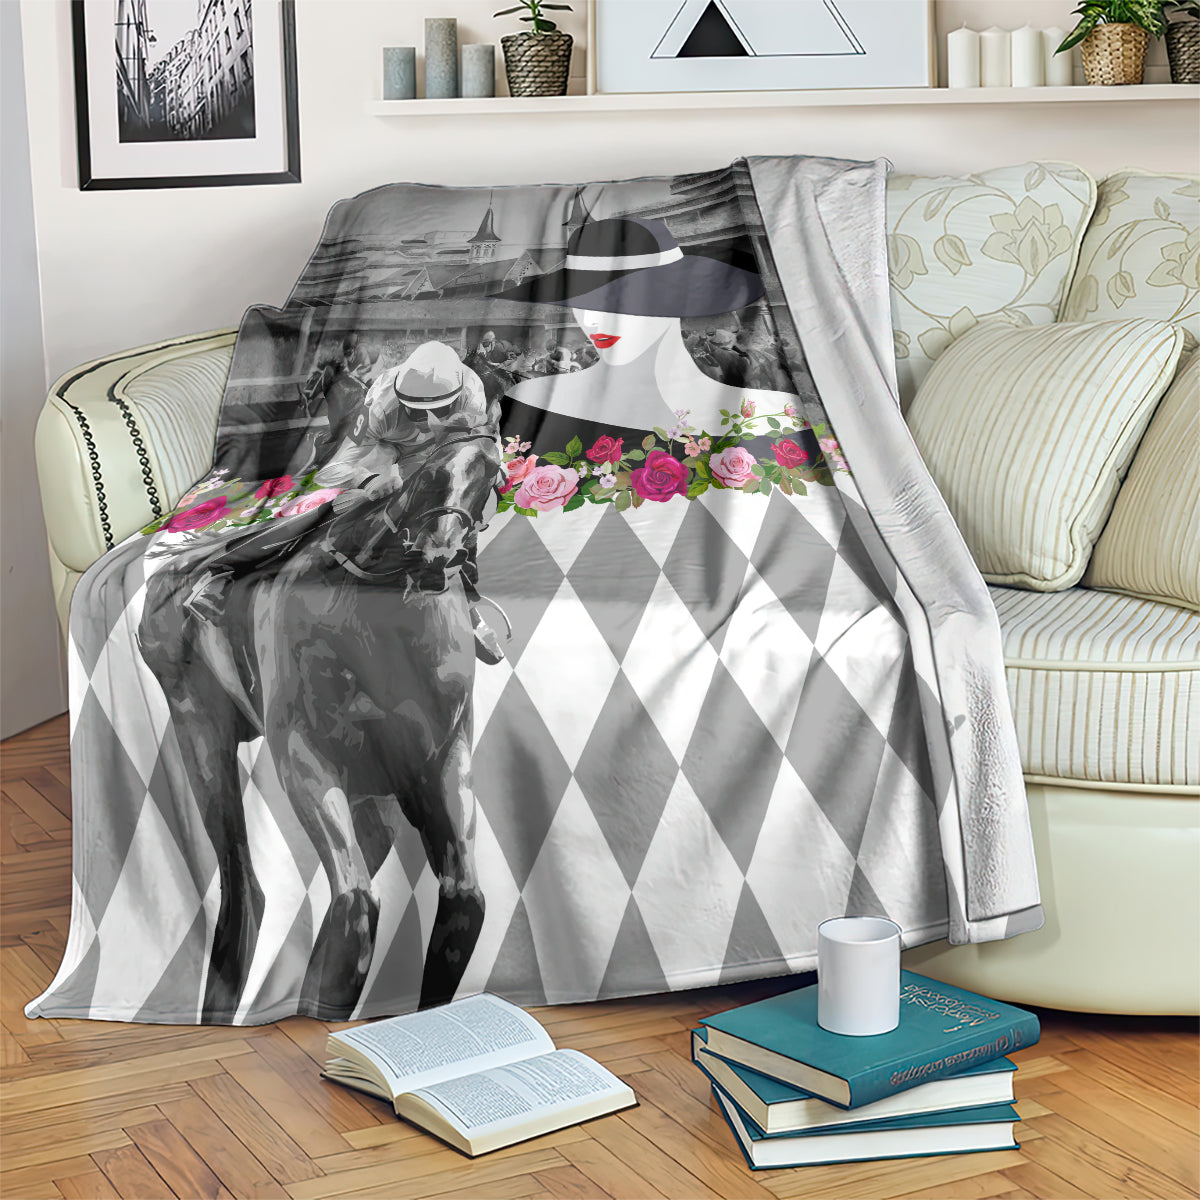 Kentucky Racing Horses Derby Hat Lady Blanket Churchill Downs and Roses Grayscale